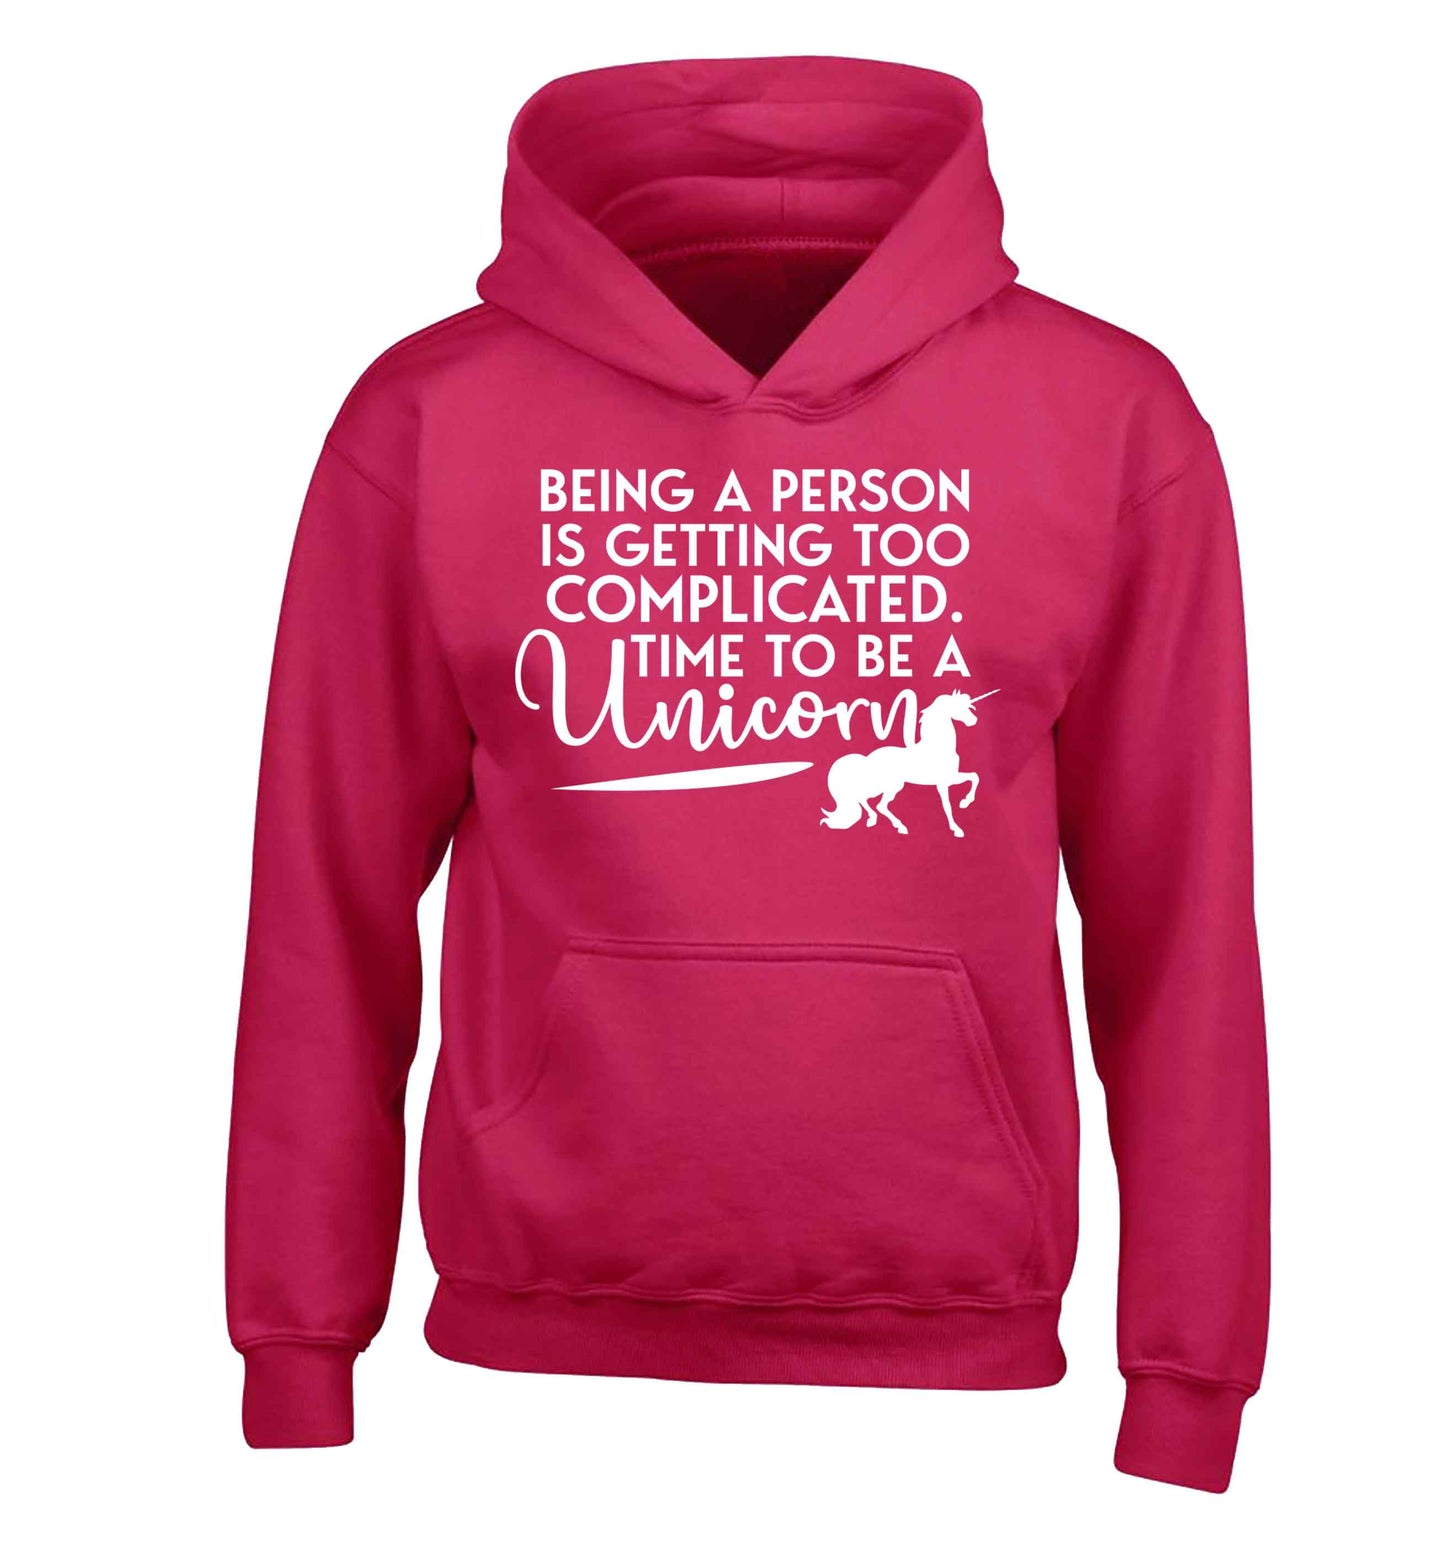 Being a person is getting too complicated time to be a unicorn children's pink hoodie 12-13 Years